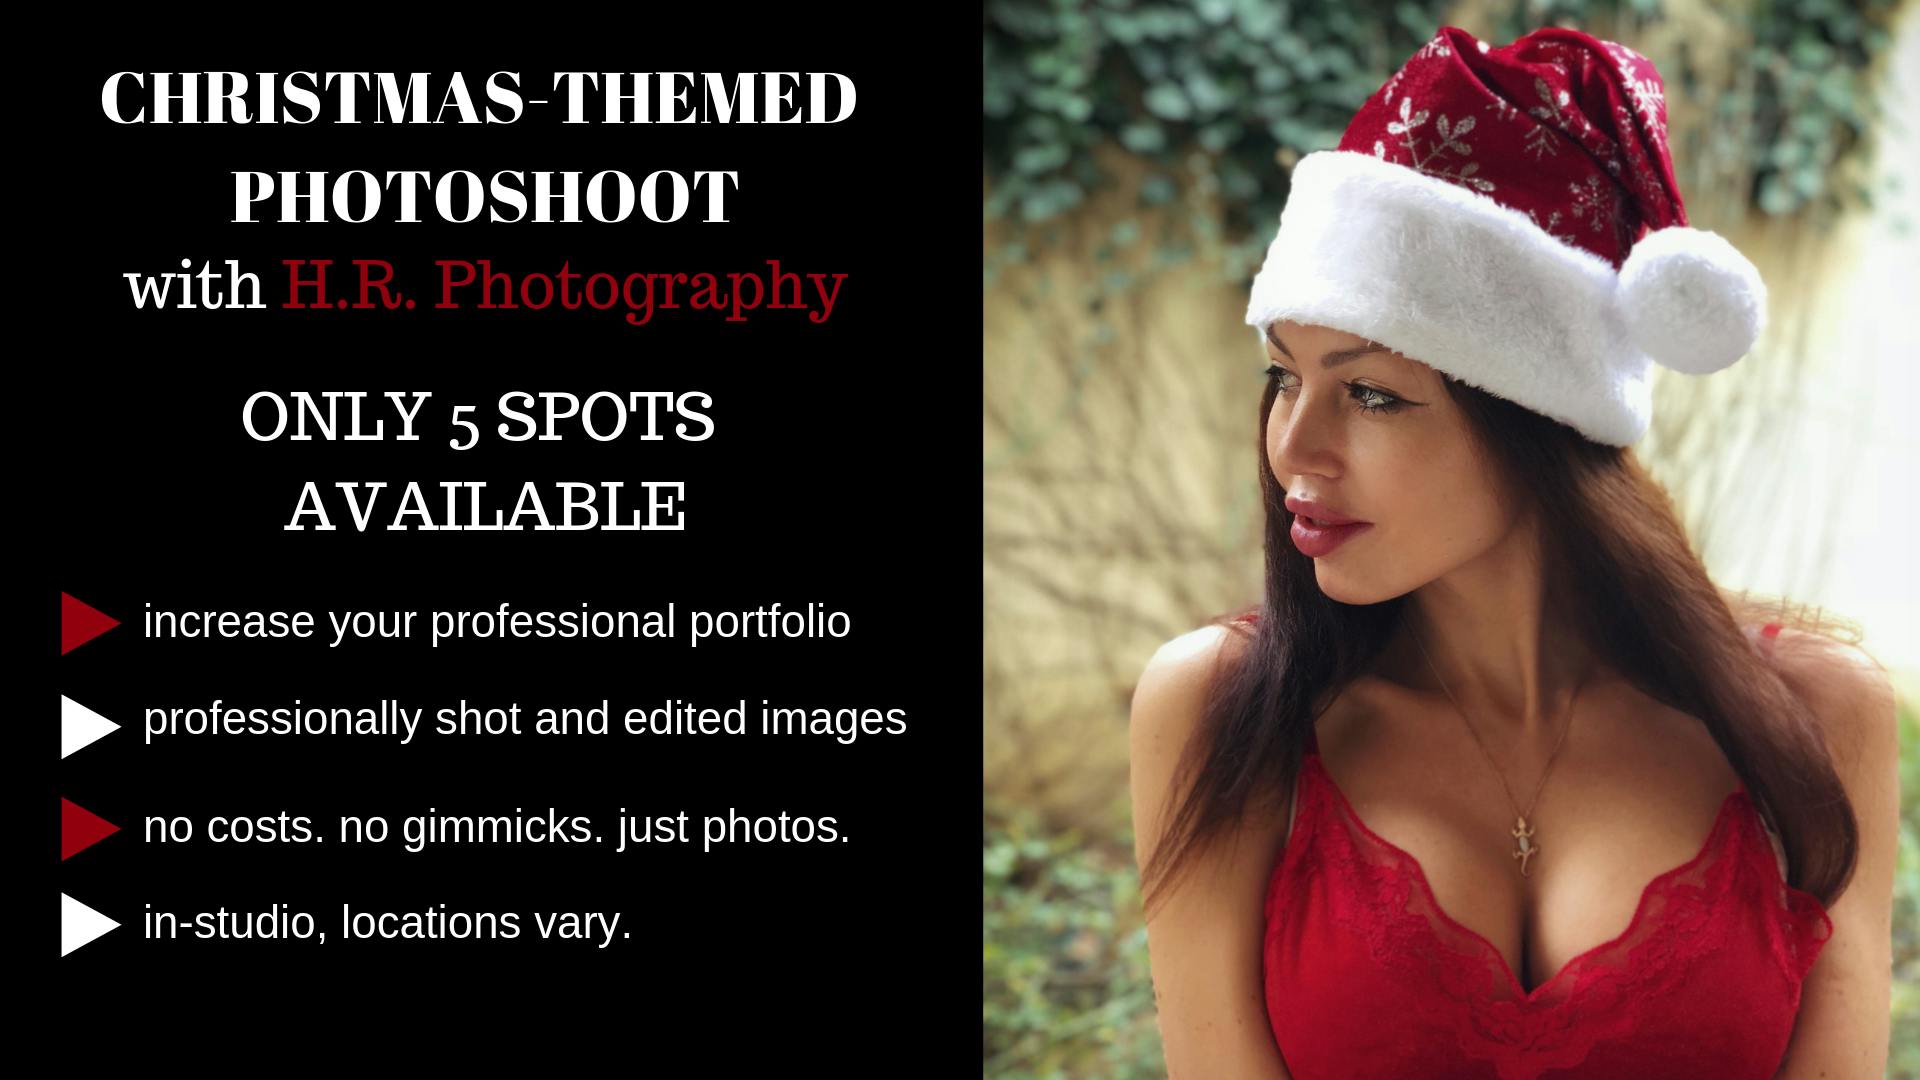 Model in H.R. Photography's Christmas Photoshoot